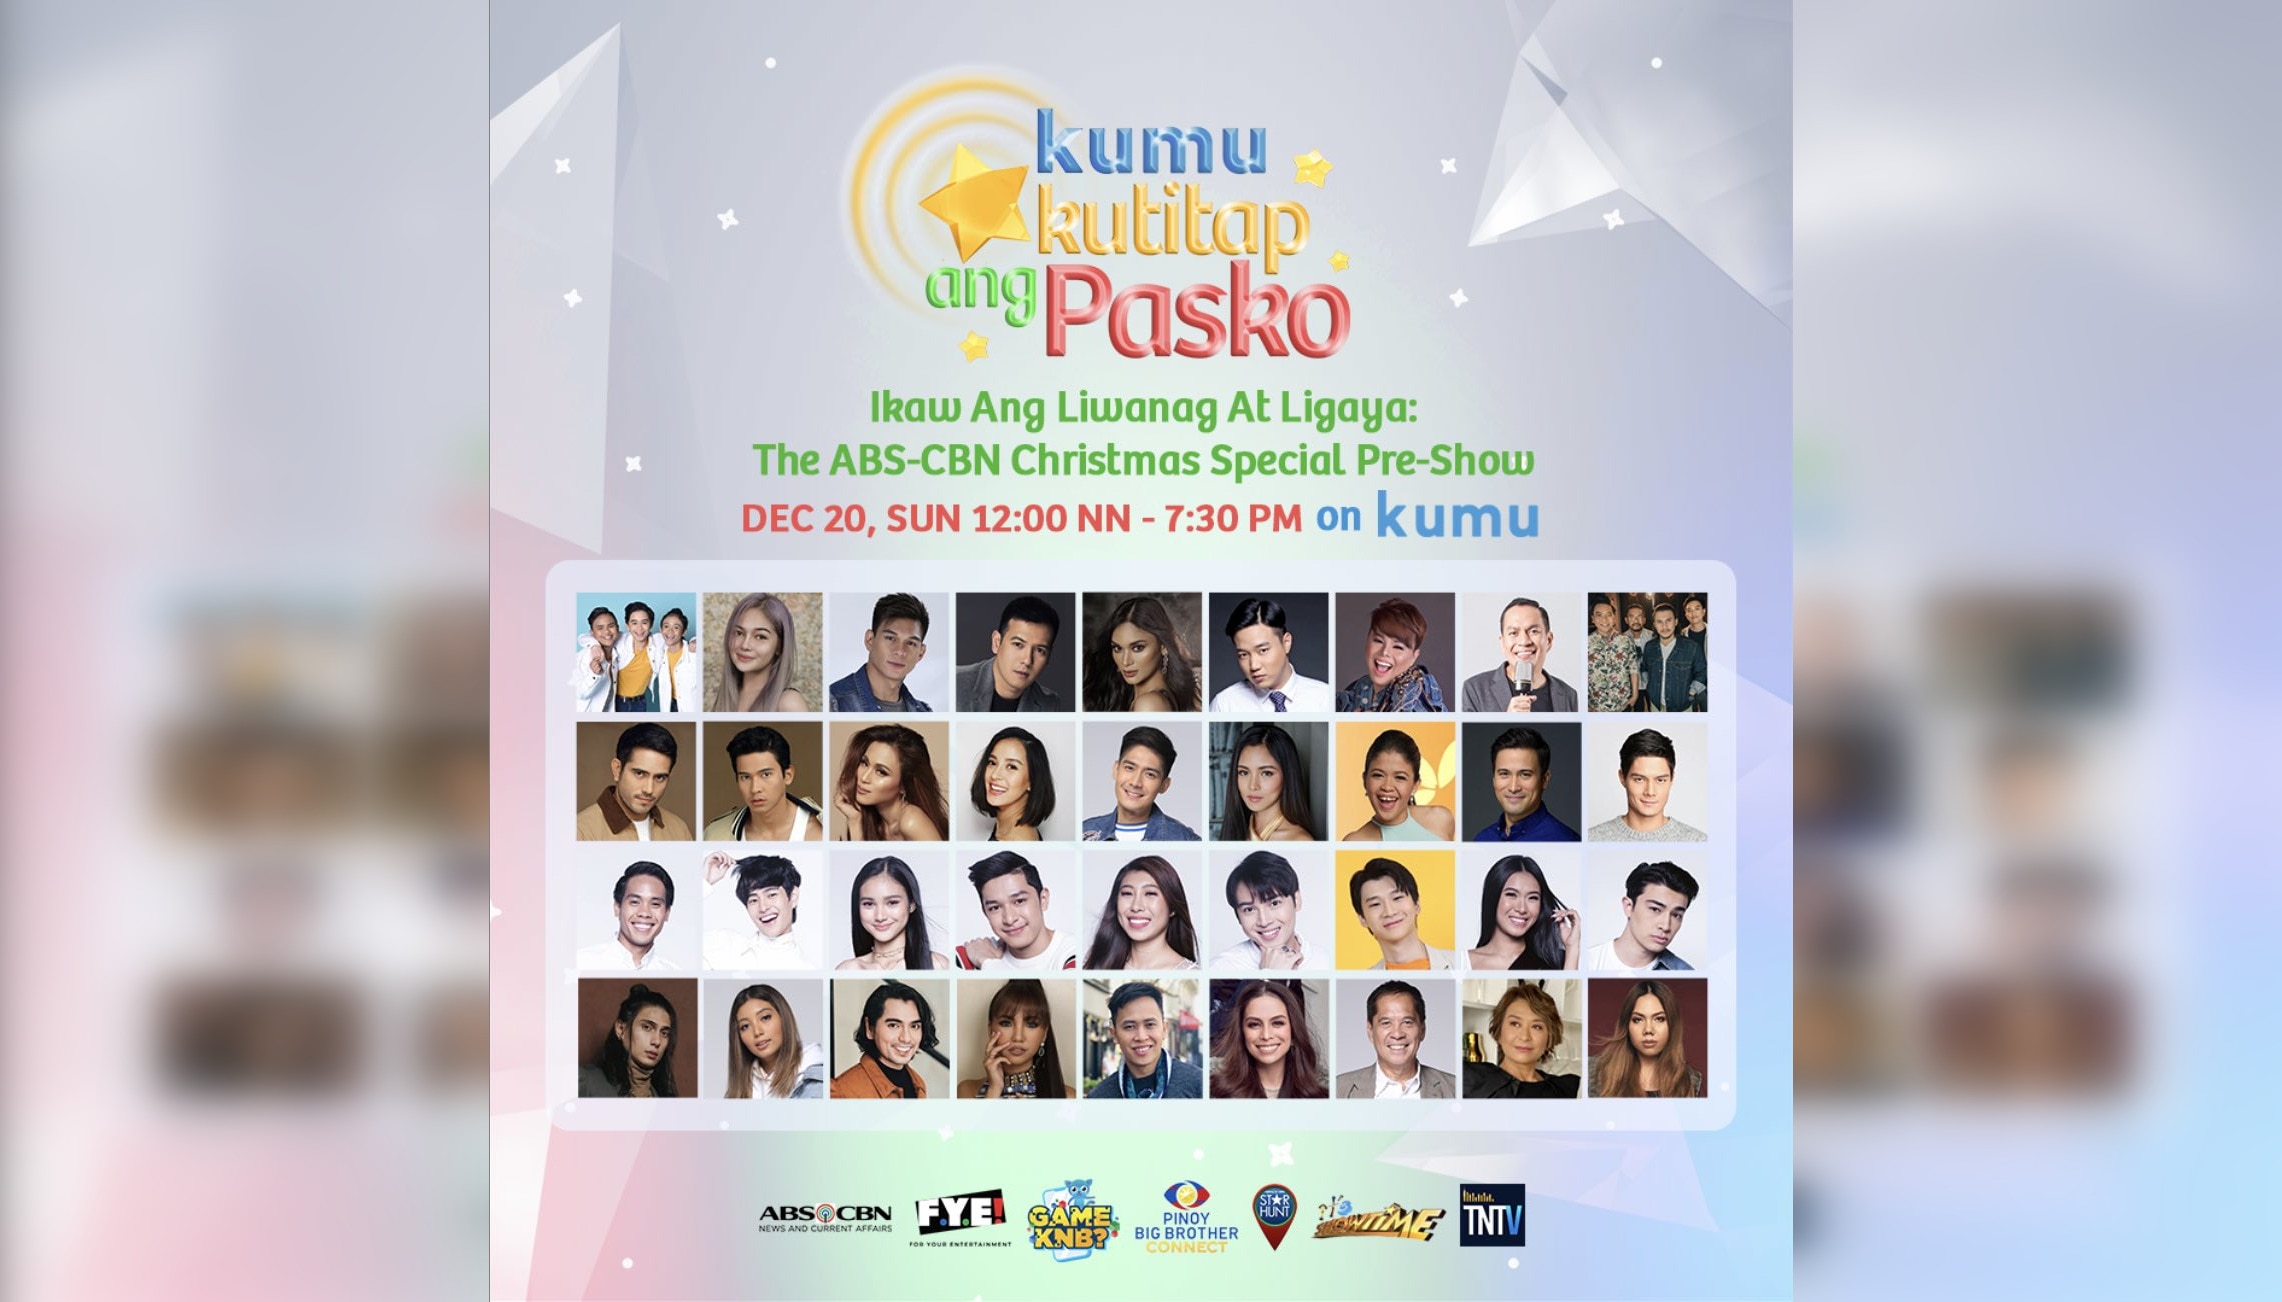 ABS-CBN Christmas Special pre-show on Kumu “Kumukutitap ang Pasko” gathers 100 stars for a cause